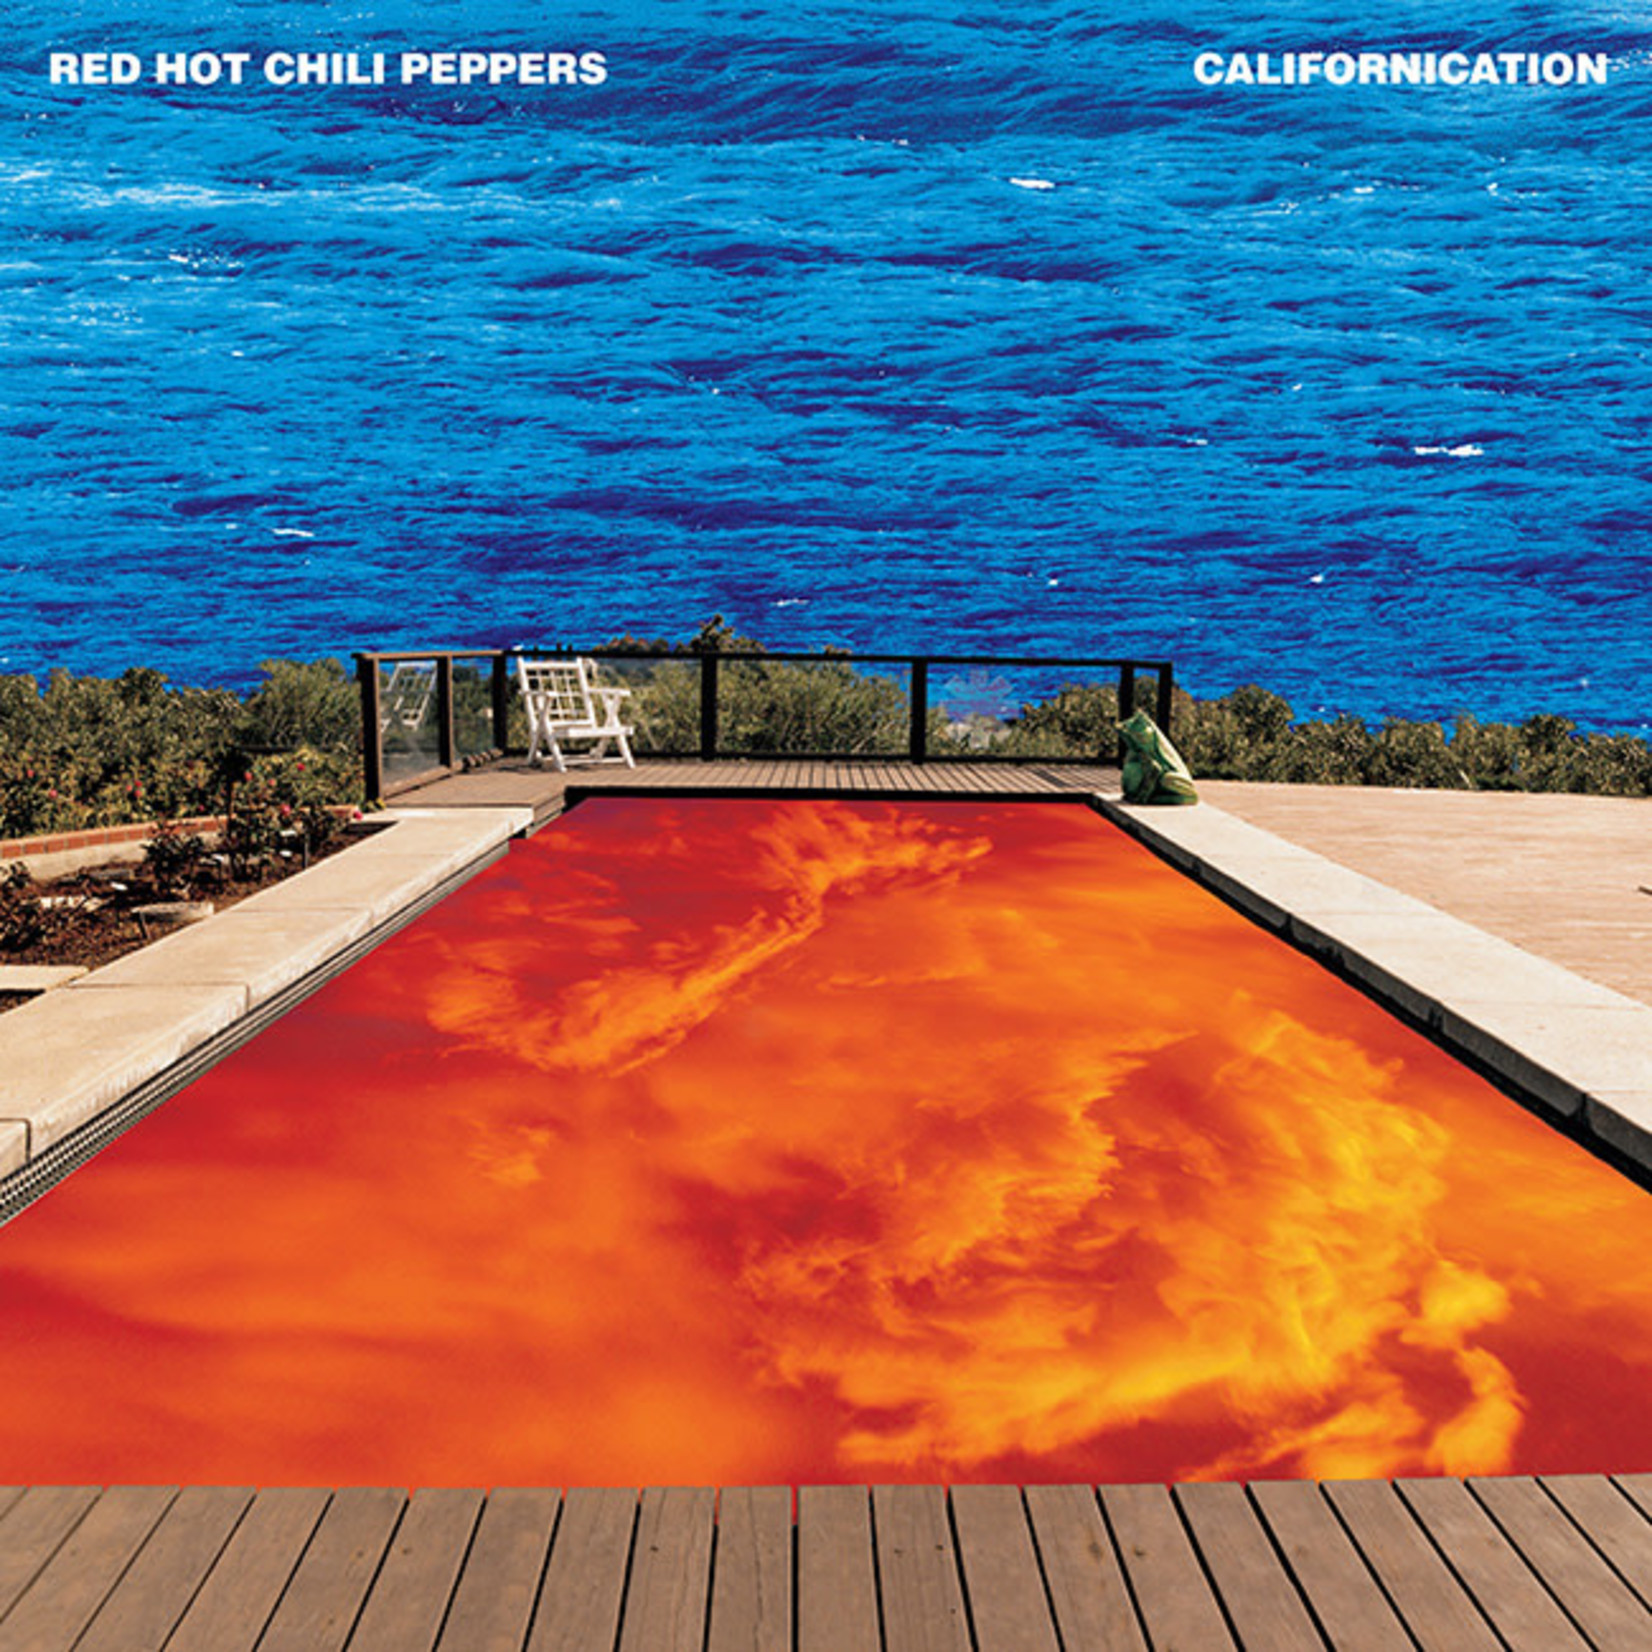 [New] Red Hot Chili Peppers - Californication (2LP)